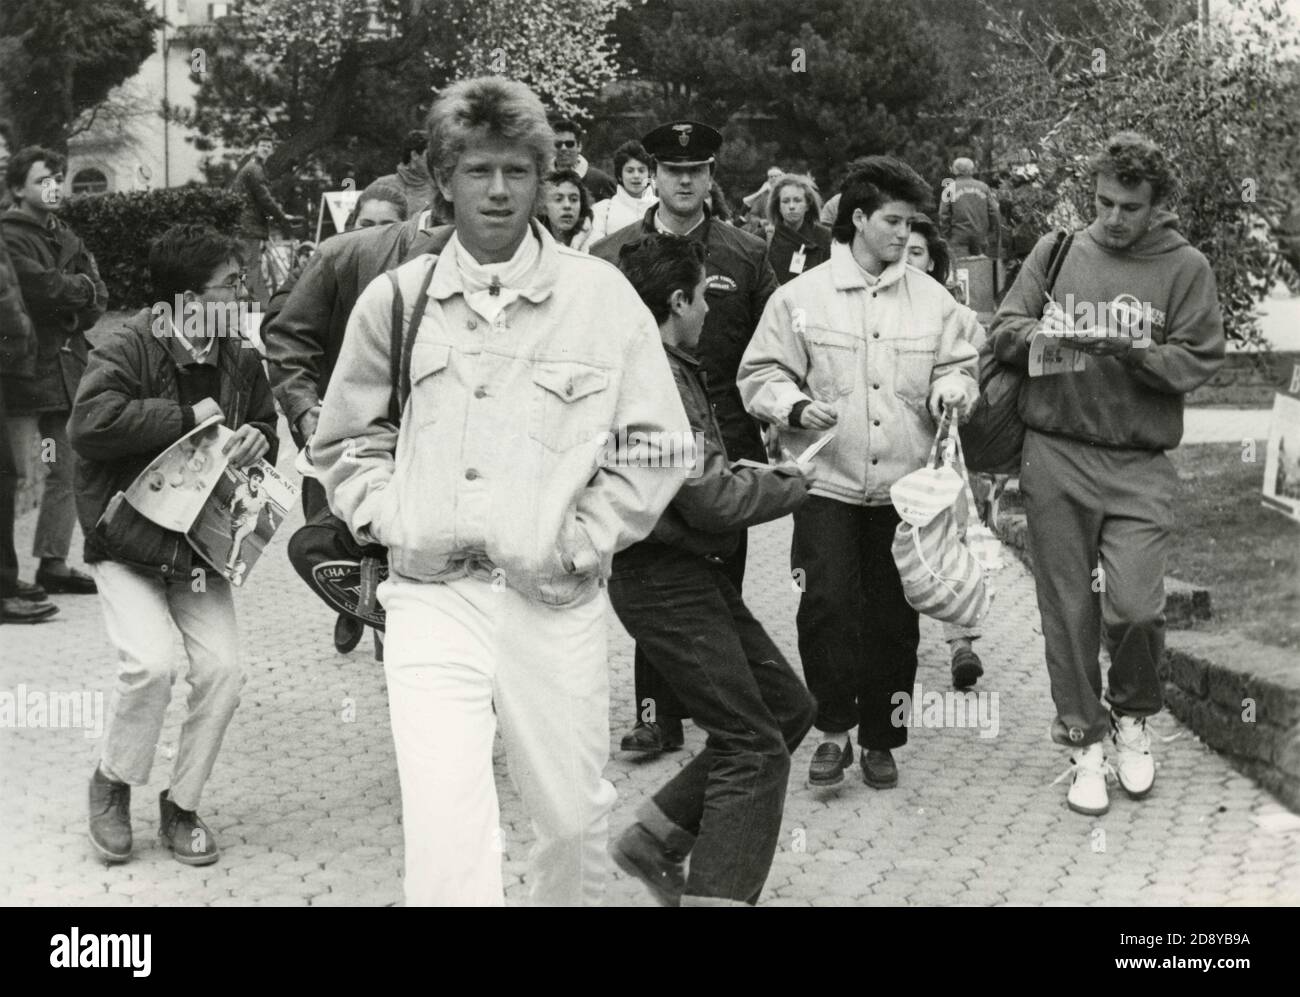 The Swedish tennis players signing autographs at the Davis Cup playoff, Italy 1987 Stock Photo